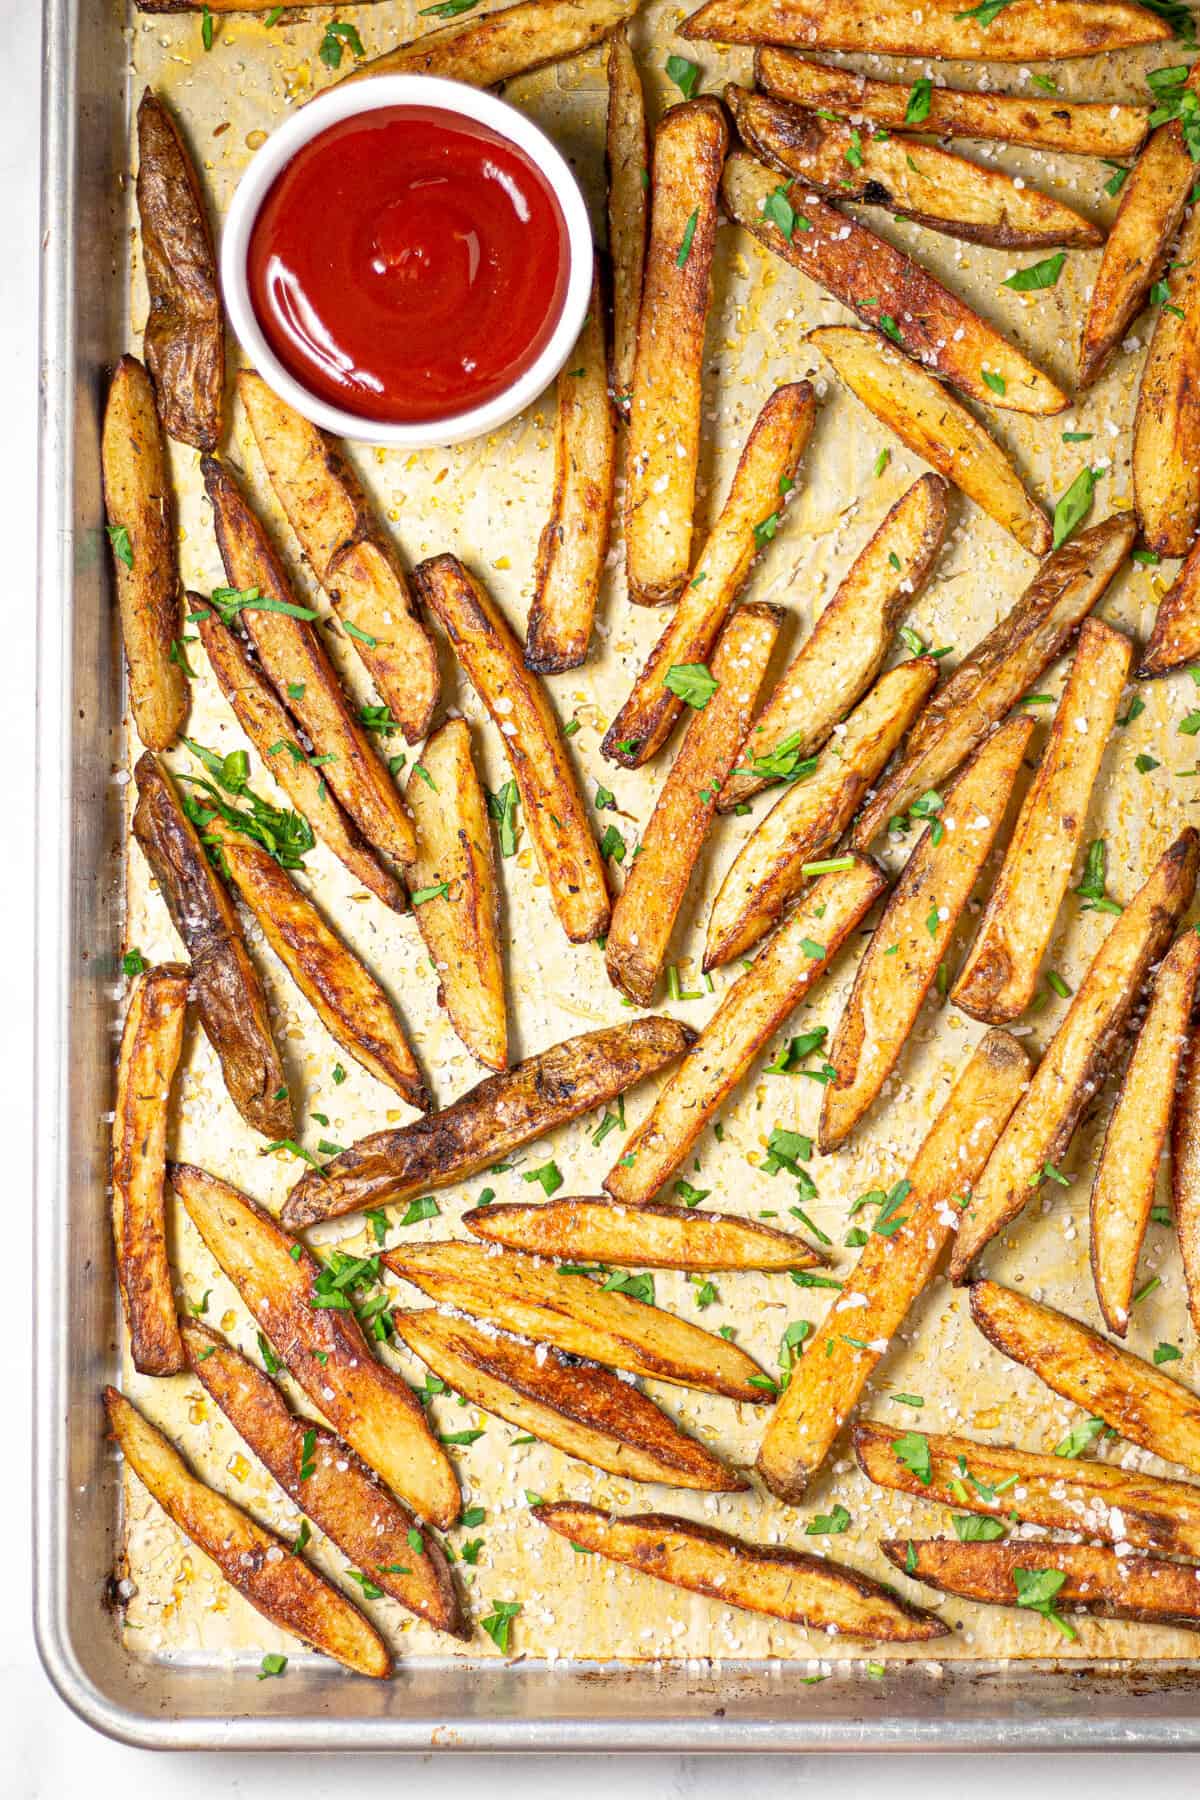 Overhead shot of a baking sheet filled with baked fries and ketchup